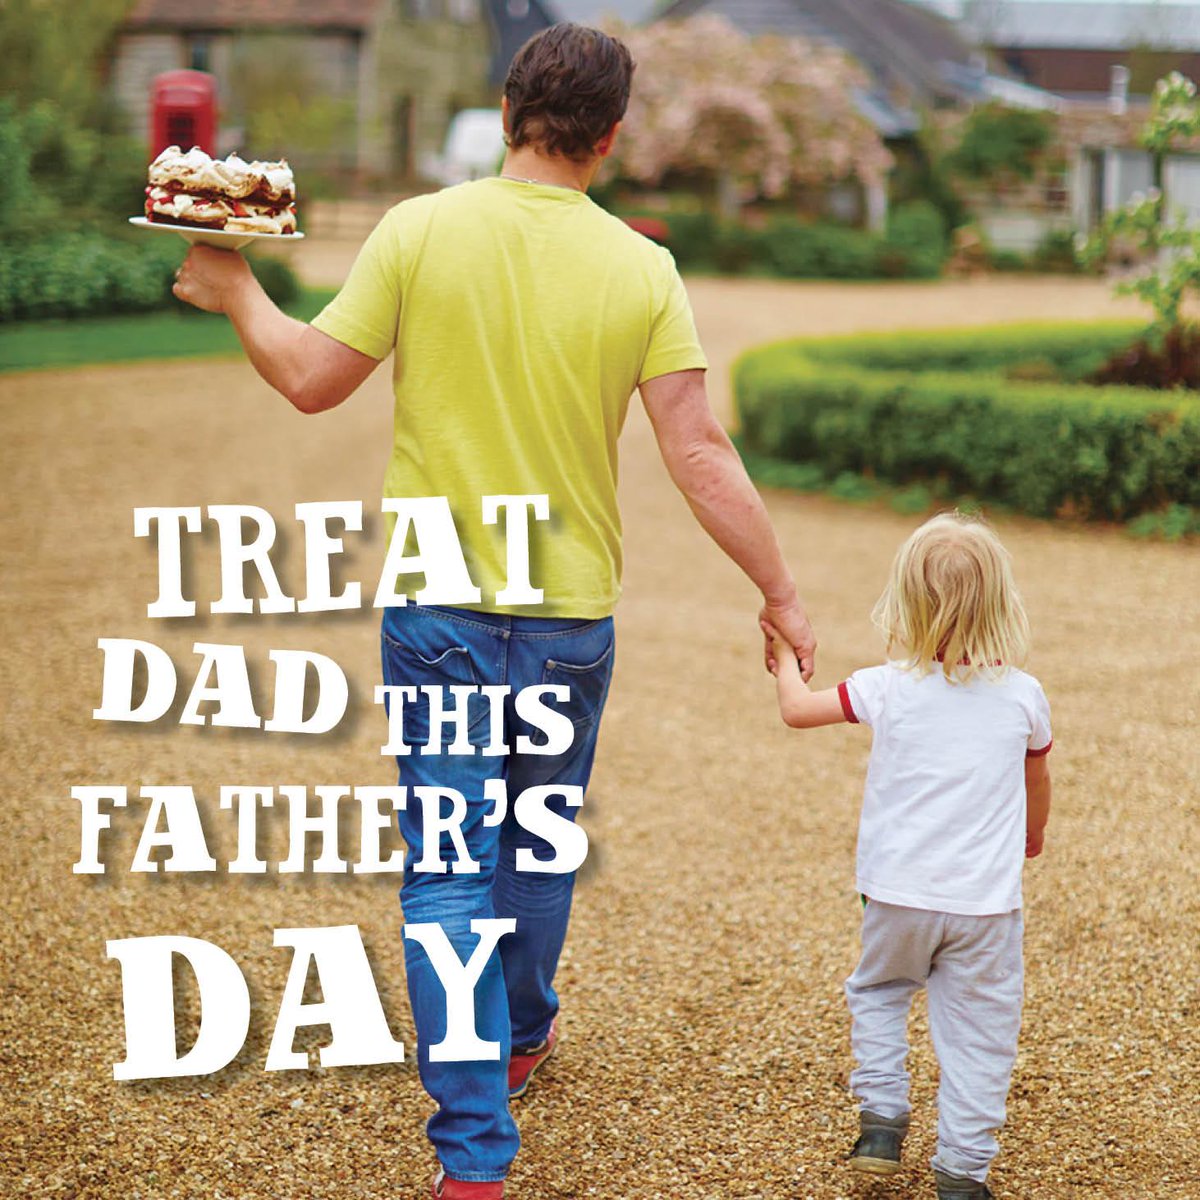 RT @JamieMagazine: Treat your dad this #FathersDay! Save 40% on a subscription, wherever you are in the world. http://t.co/nSNPvC1ofZ http:…